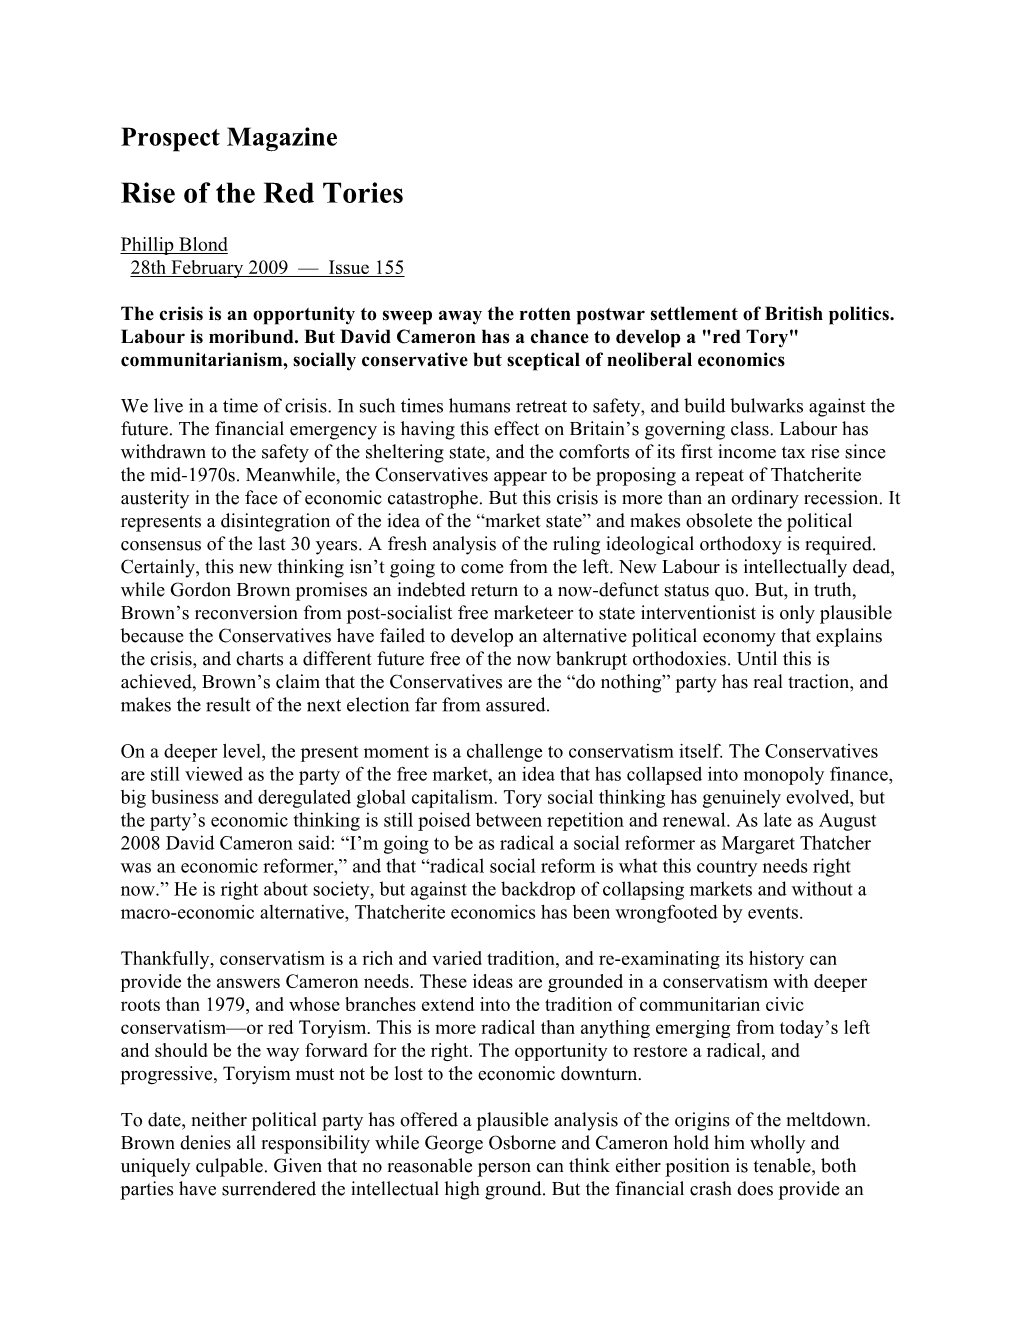 Prospect Magazine Rise of the Red Tories